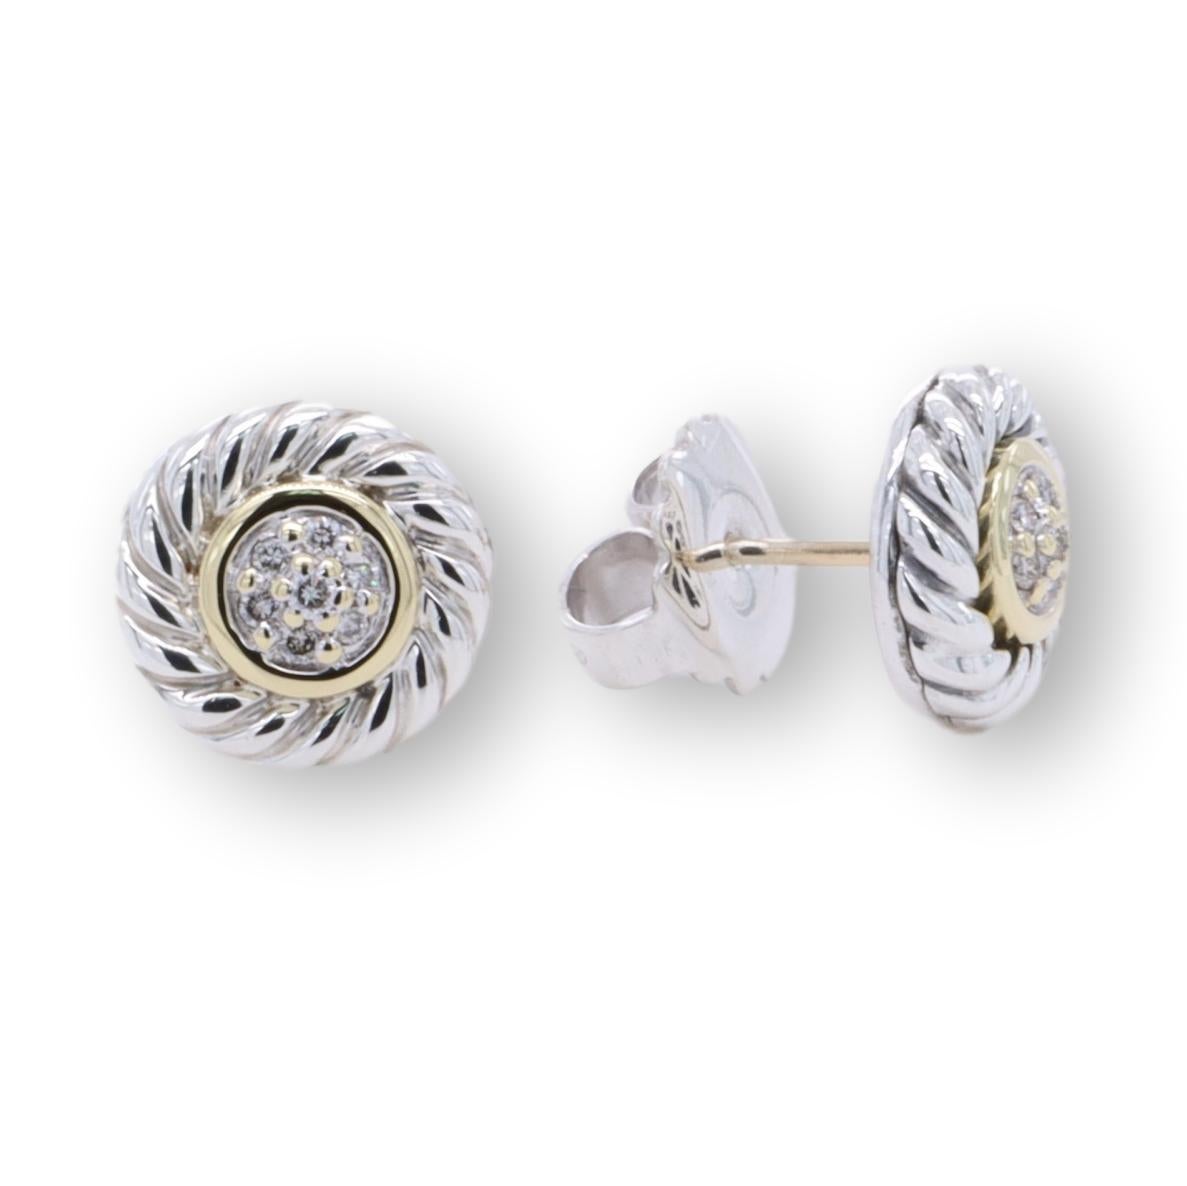 David Yurman pair of stud earrings from the cable cookie classics collection finely crafted in fine sterling silver featuring 2 pave diamond centers weighing 0.12 carats approximately with an 18K yellow gold rim and silver cable design frame. The